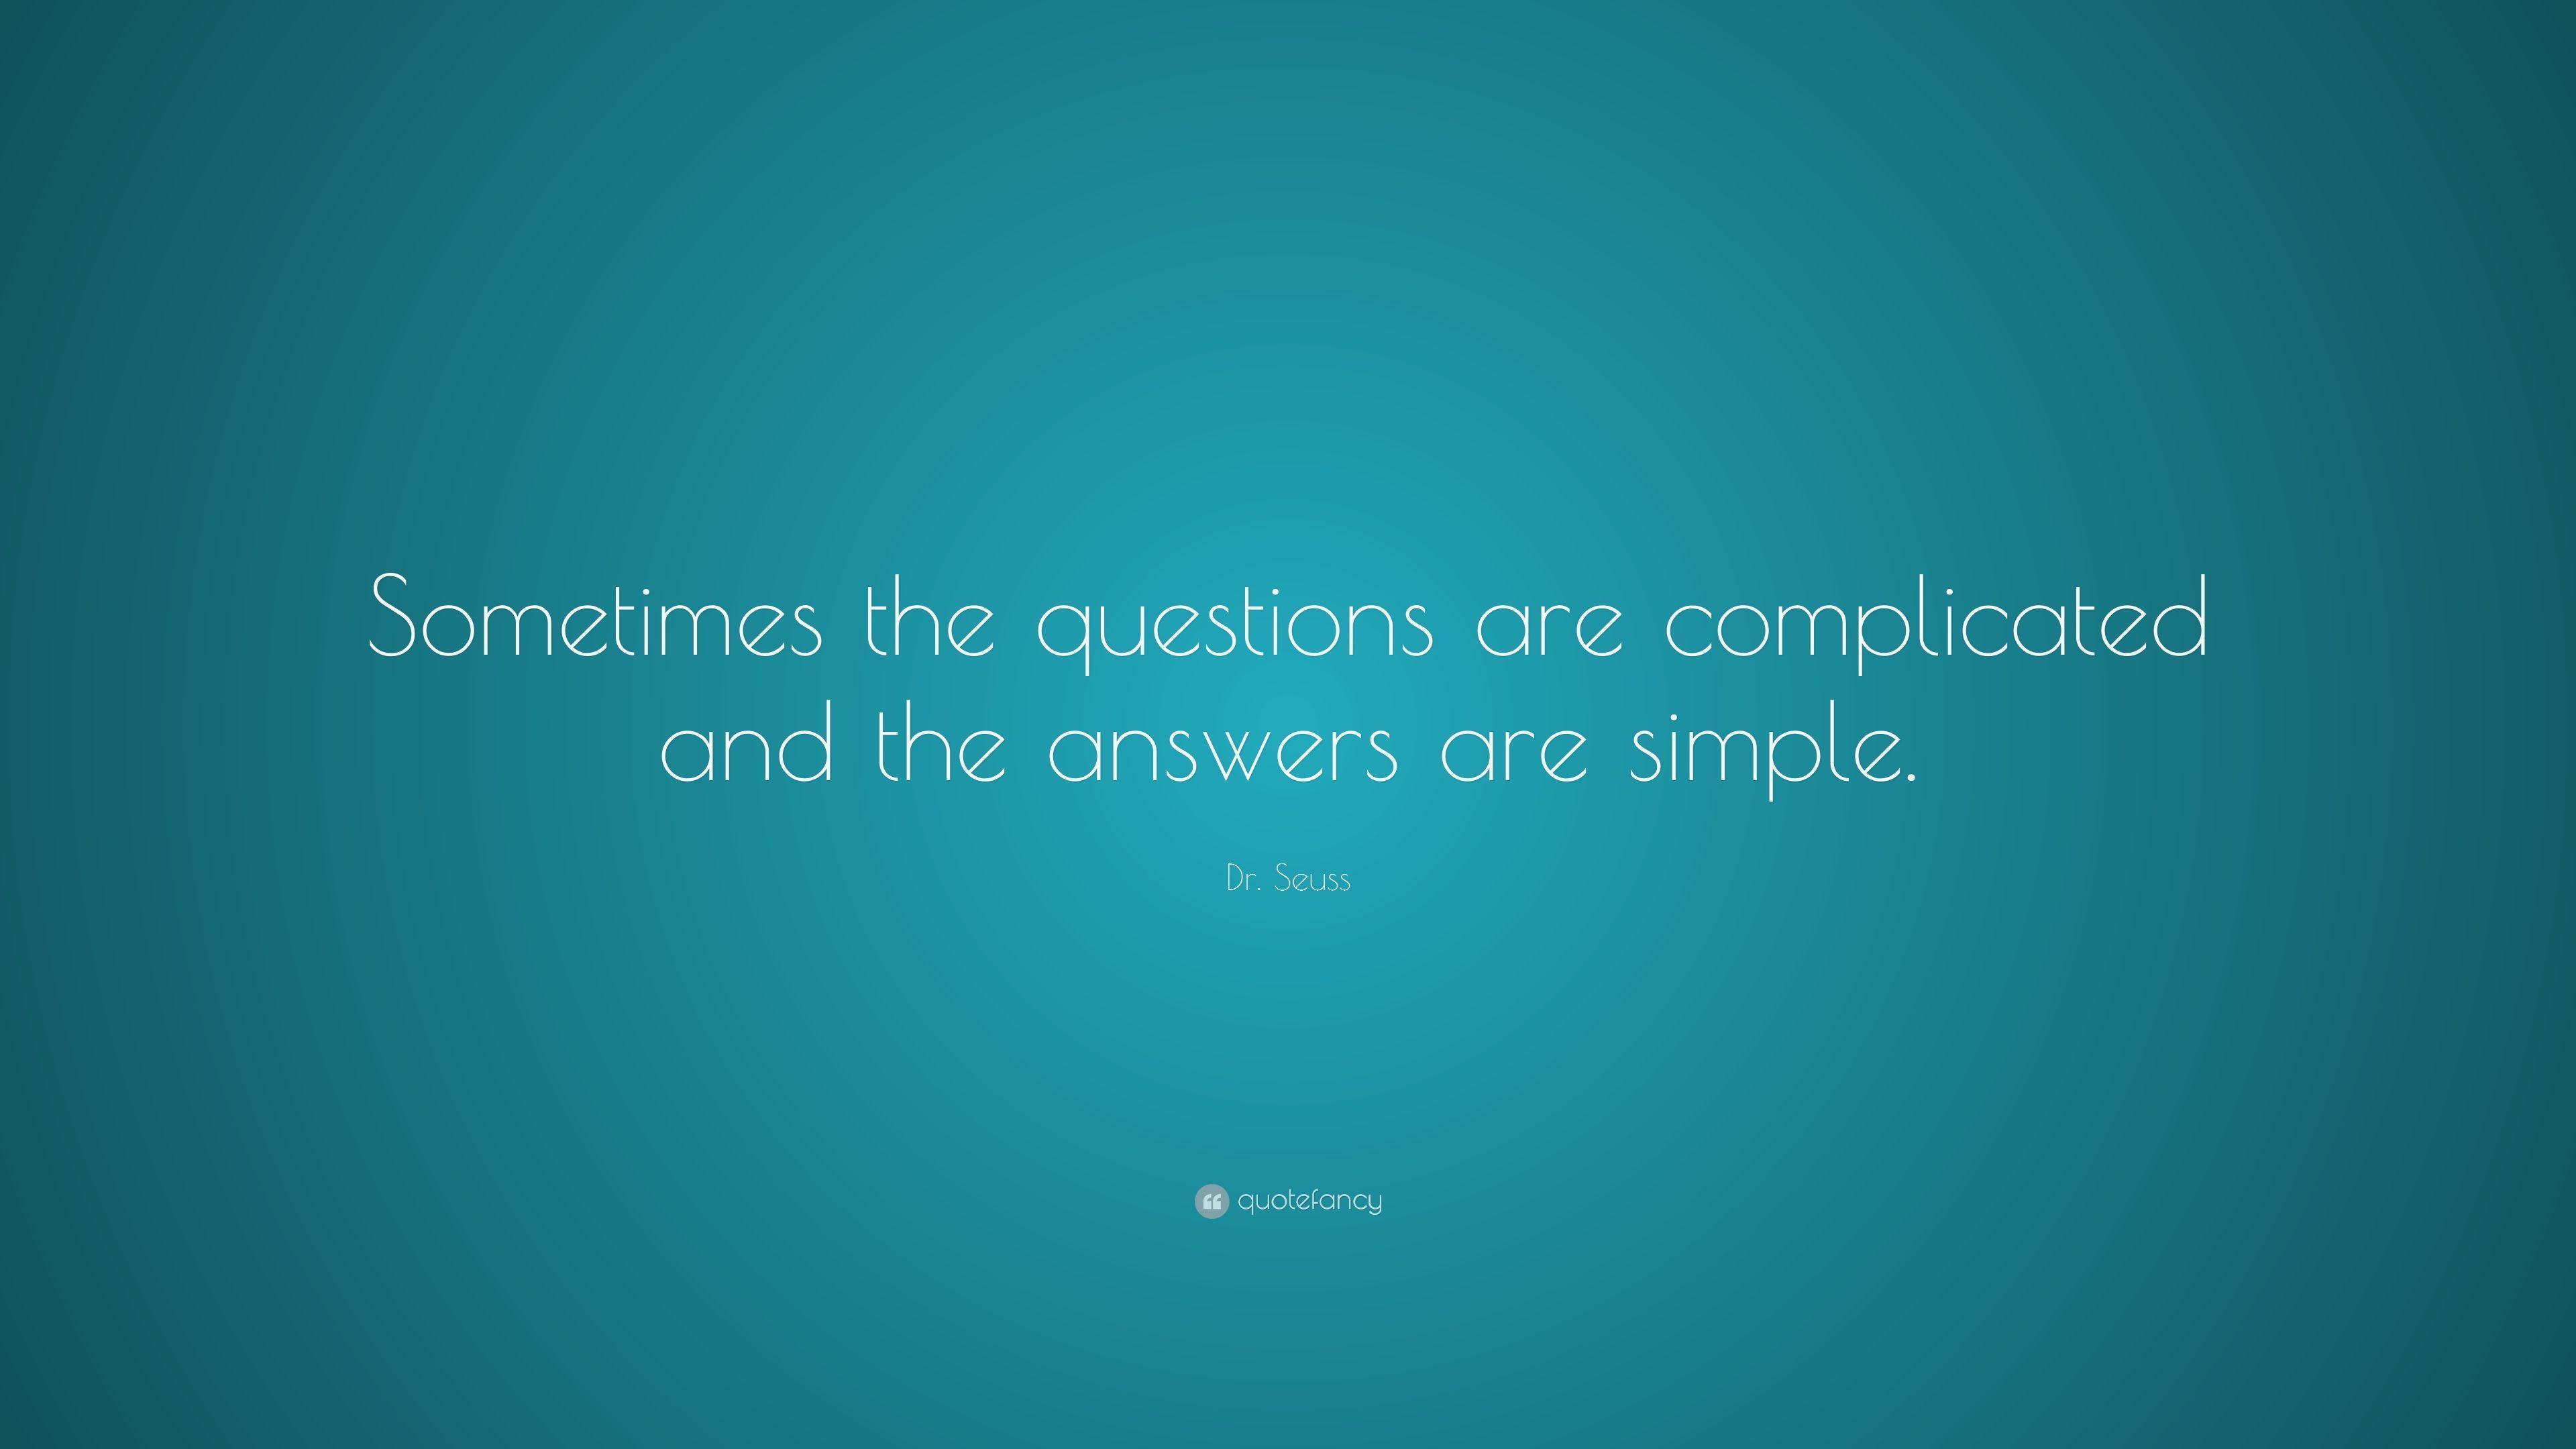 Dr. Seuss Quote: “Sometimes the questions are complicated and the